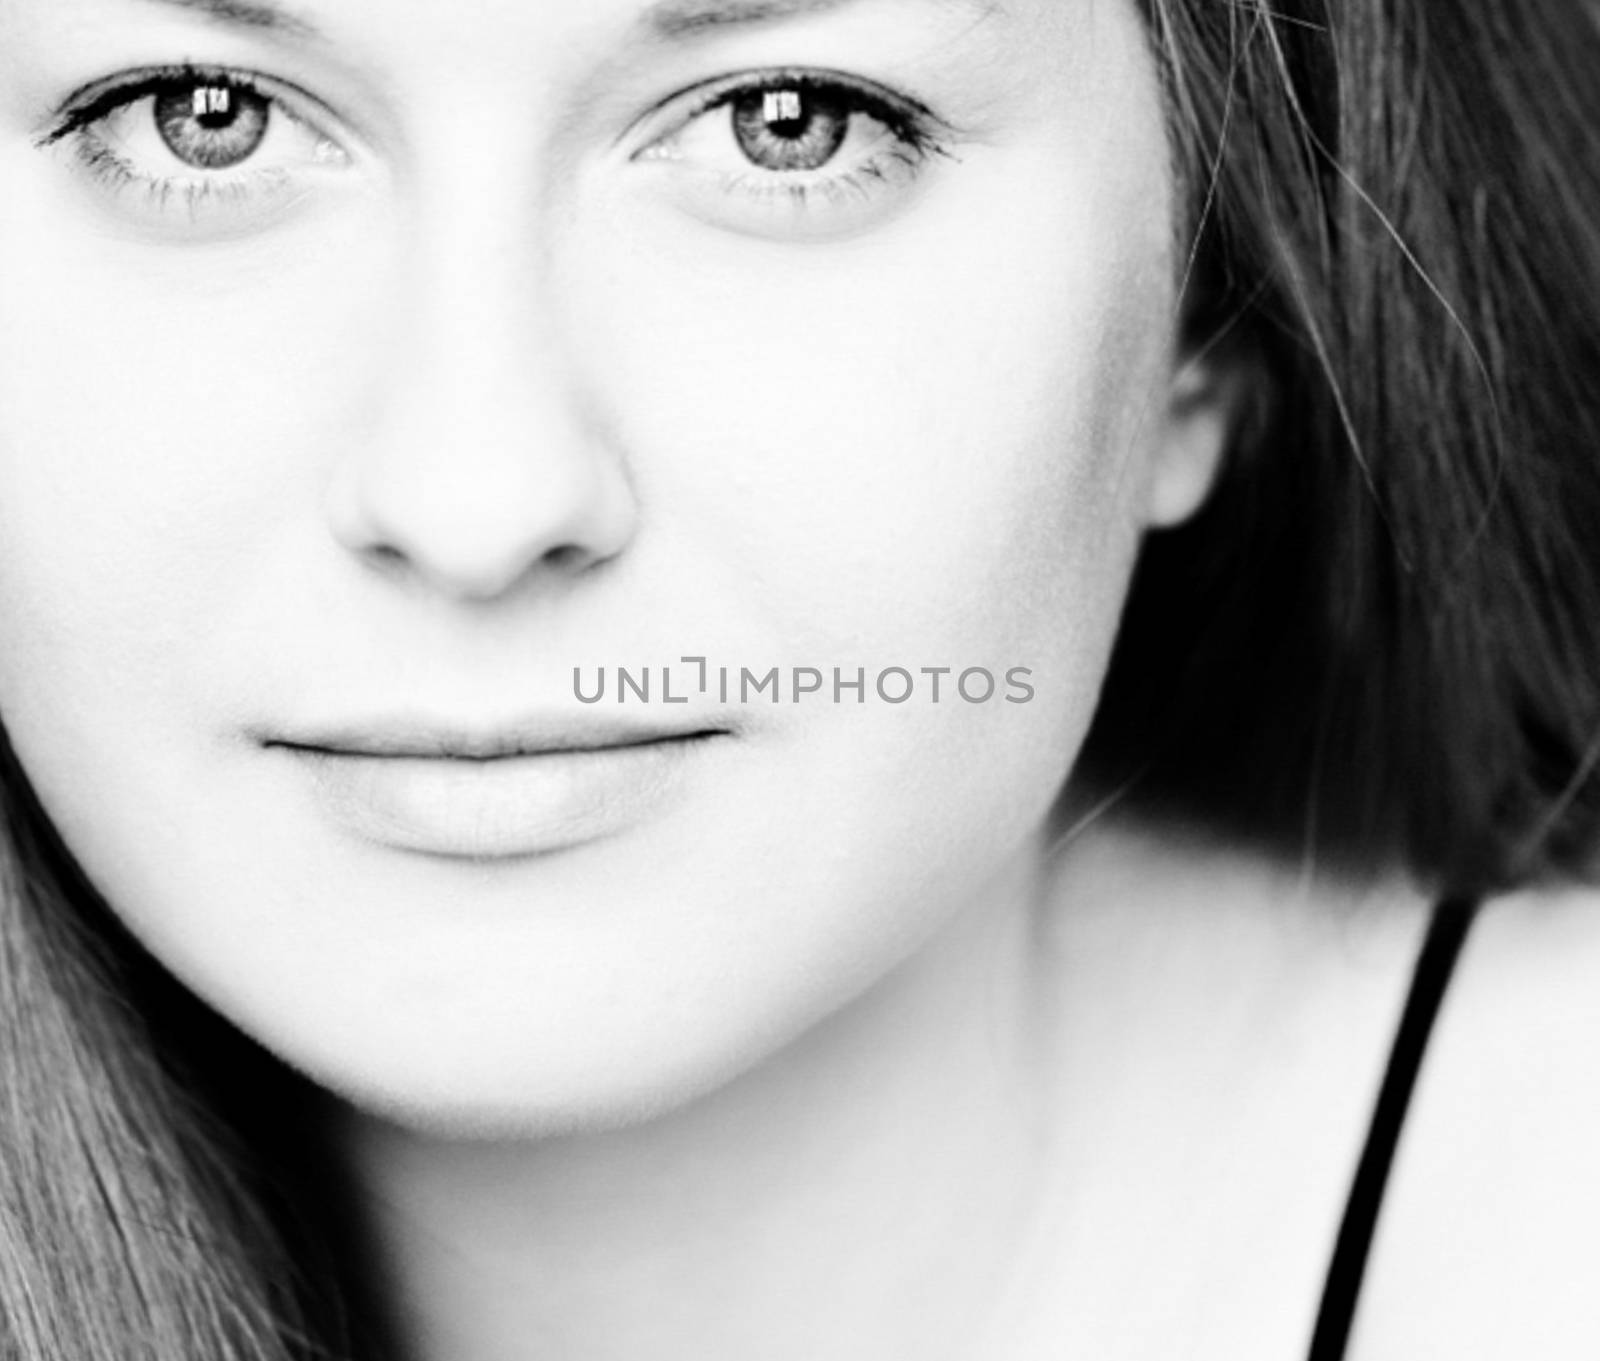 Beauty face portrait of a young woman, natural makeup look, skincare and cosmetics